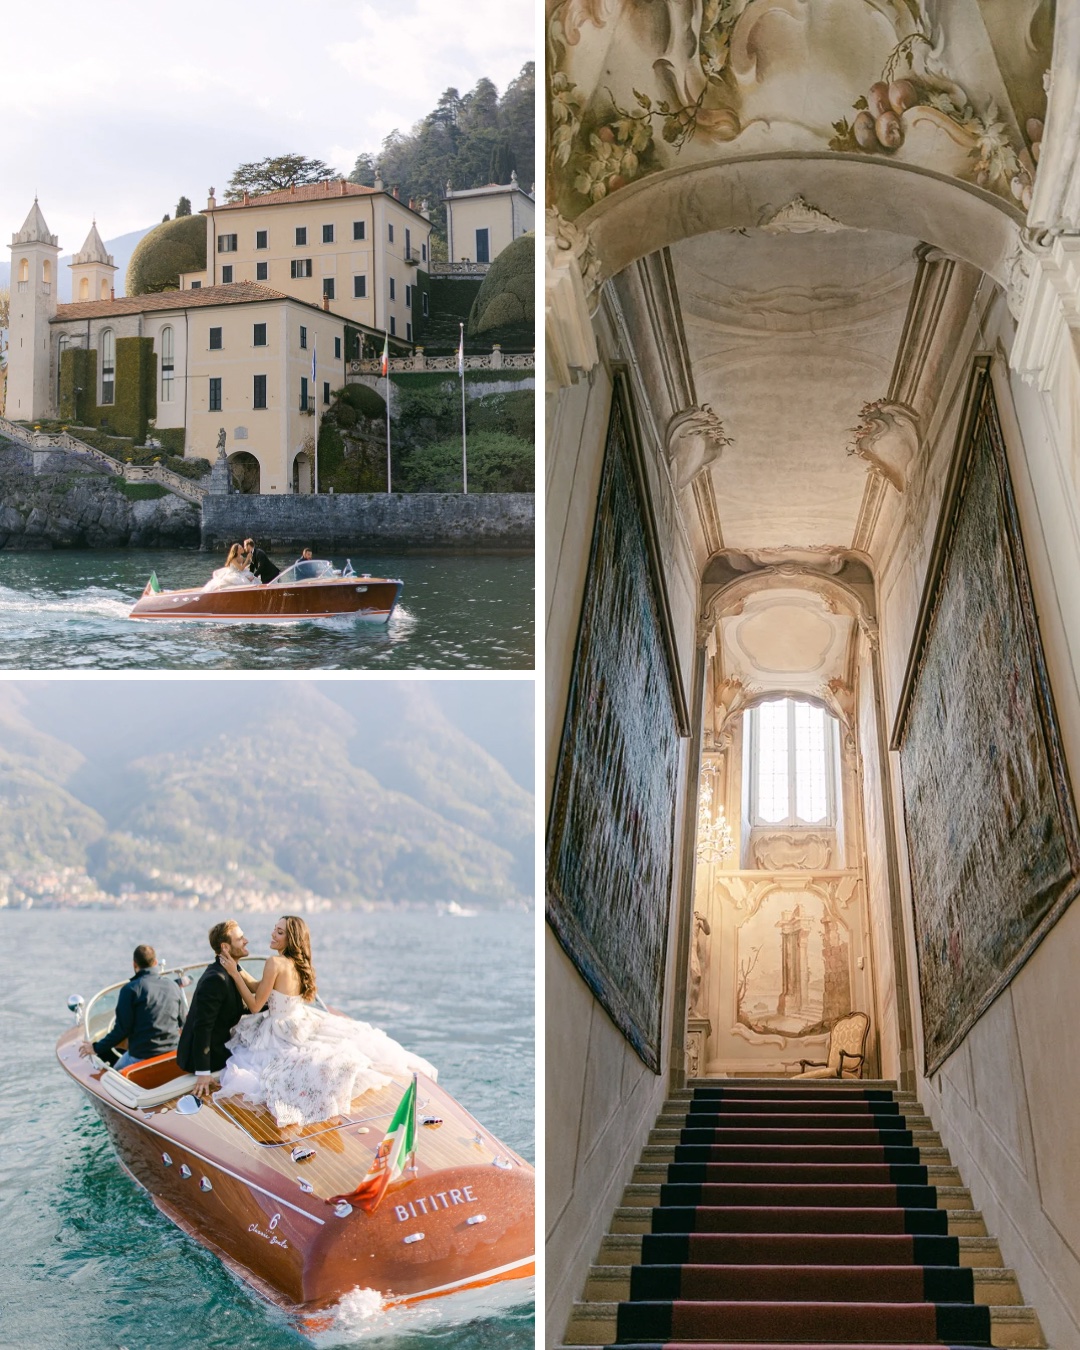 Collage of photos of an Italian speedboat (Riva) and the grand entrance to a villa on Lake Como